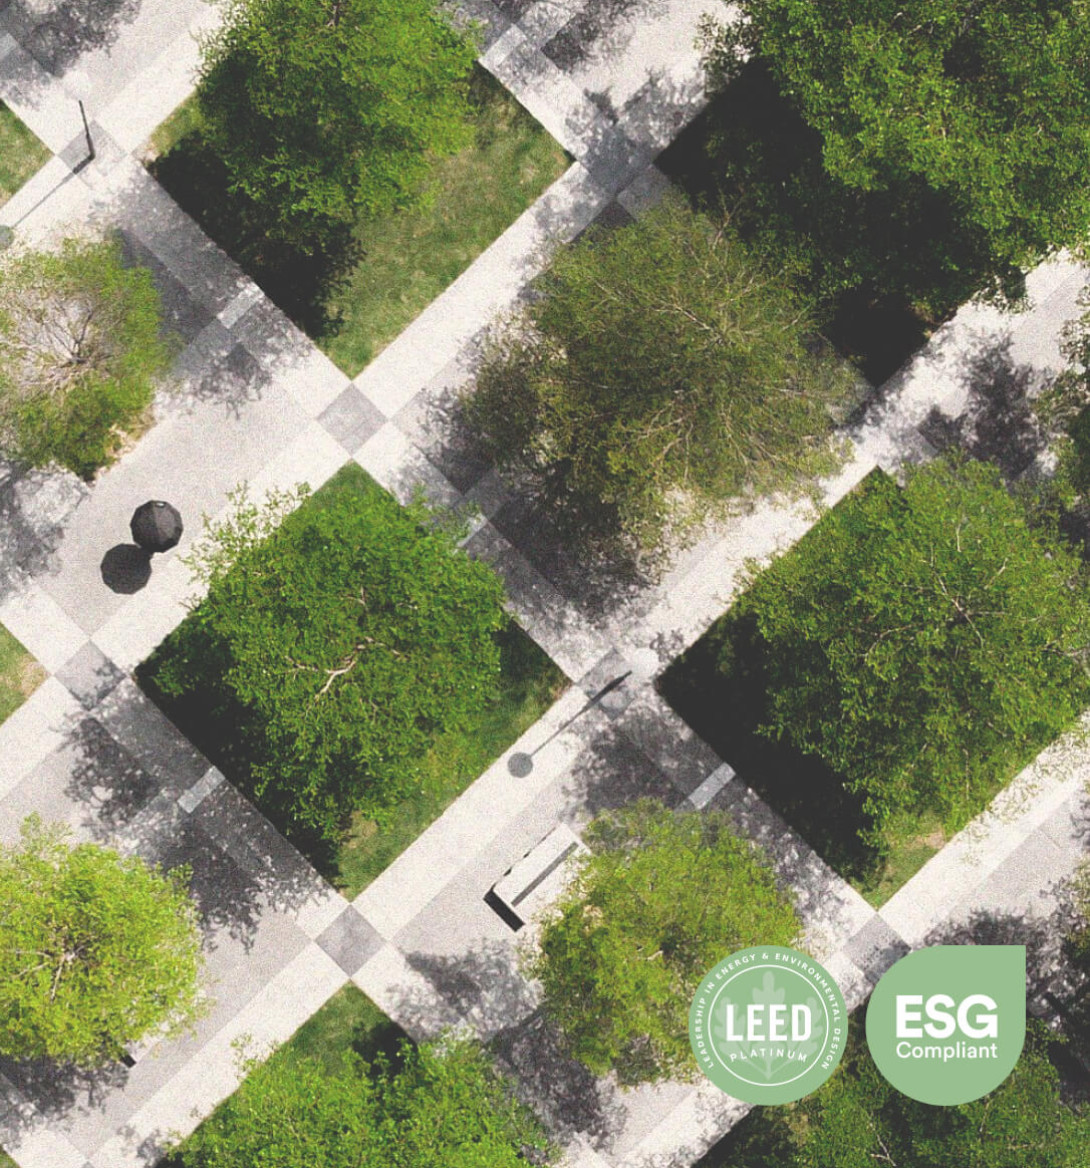 Palma Uptown Offices adheres to ESG principles and meets the highest  <img src='/files/Icons/icon.sustainability.roof.svg' /> LEED Platinum certification criteria